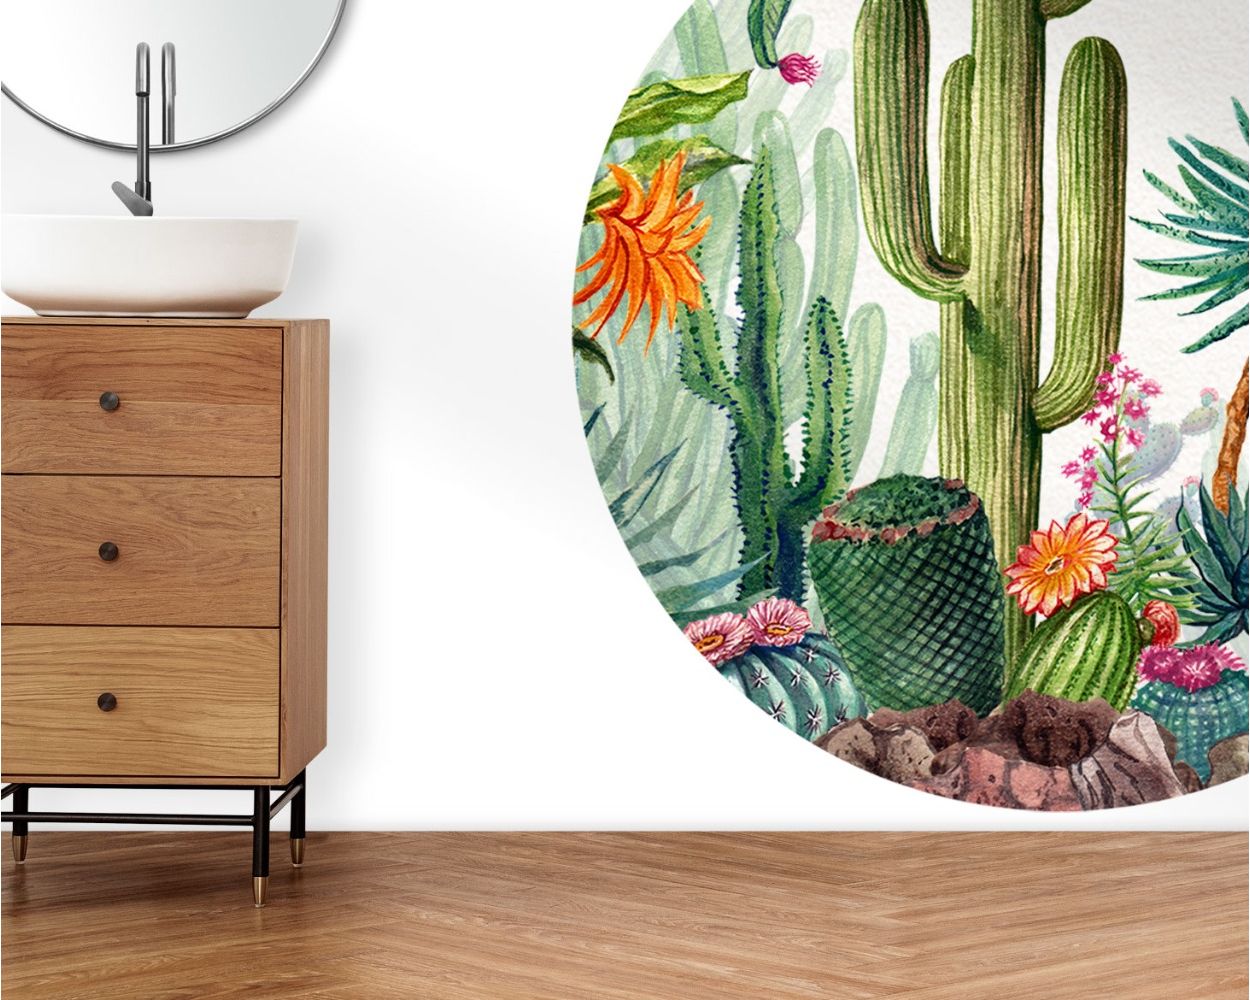 Cactus & Succulents Wall Stickers